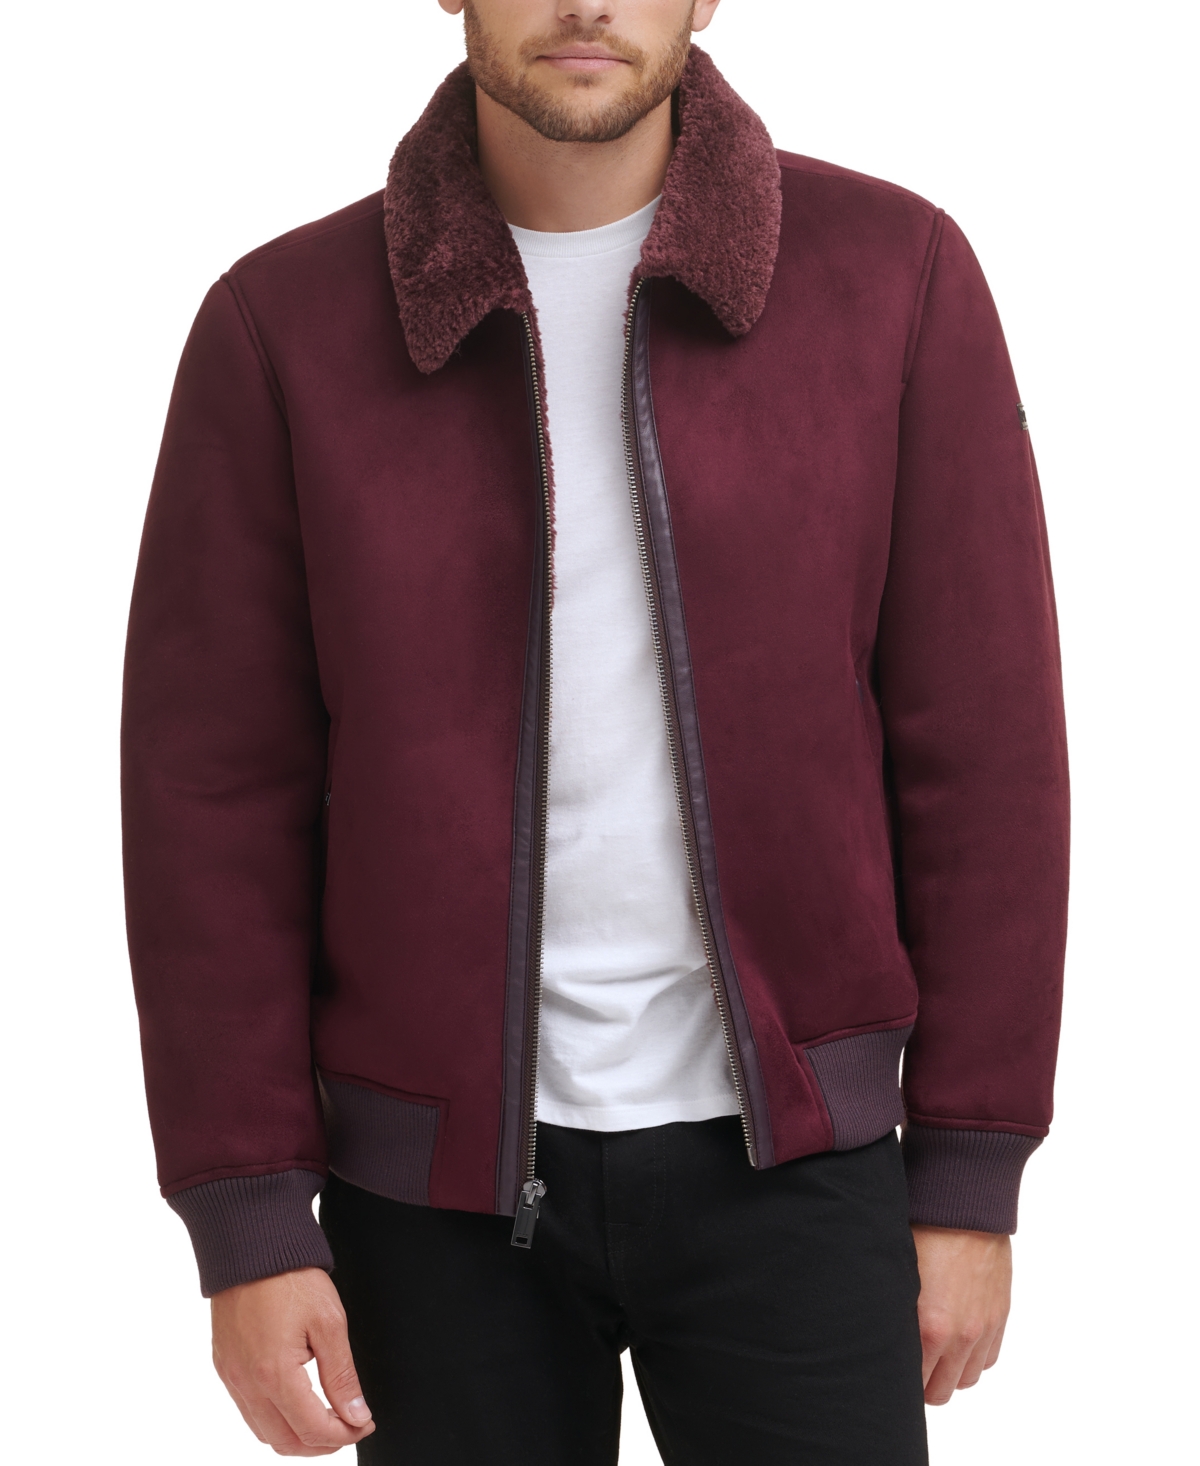 Men's Faux Shearling Bomber Jacket with Faux Fur Collar, Created for Macy's - Black